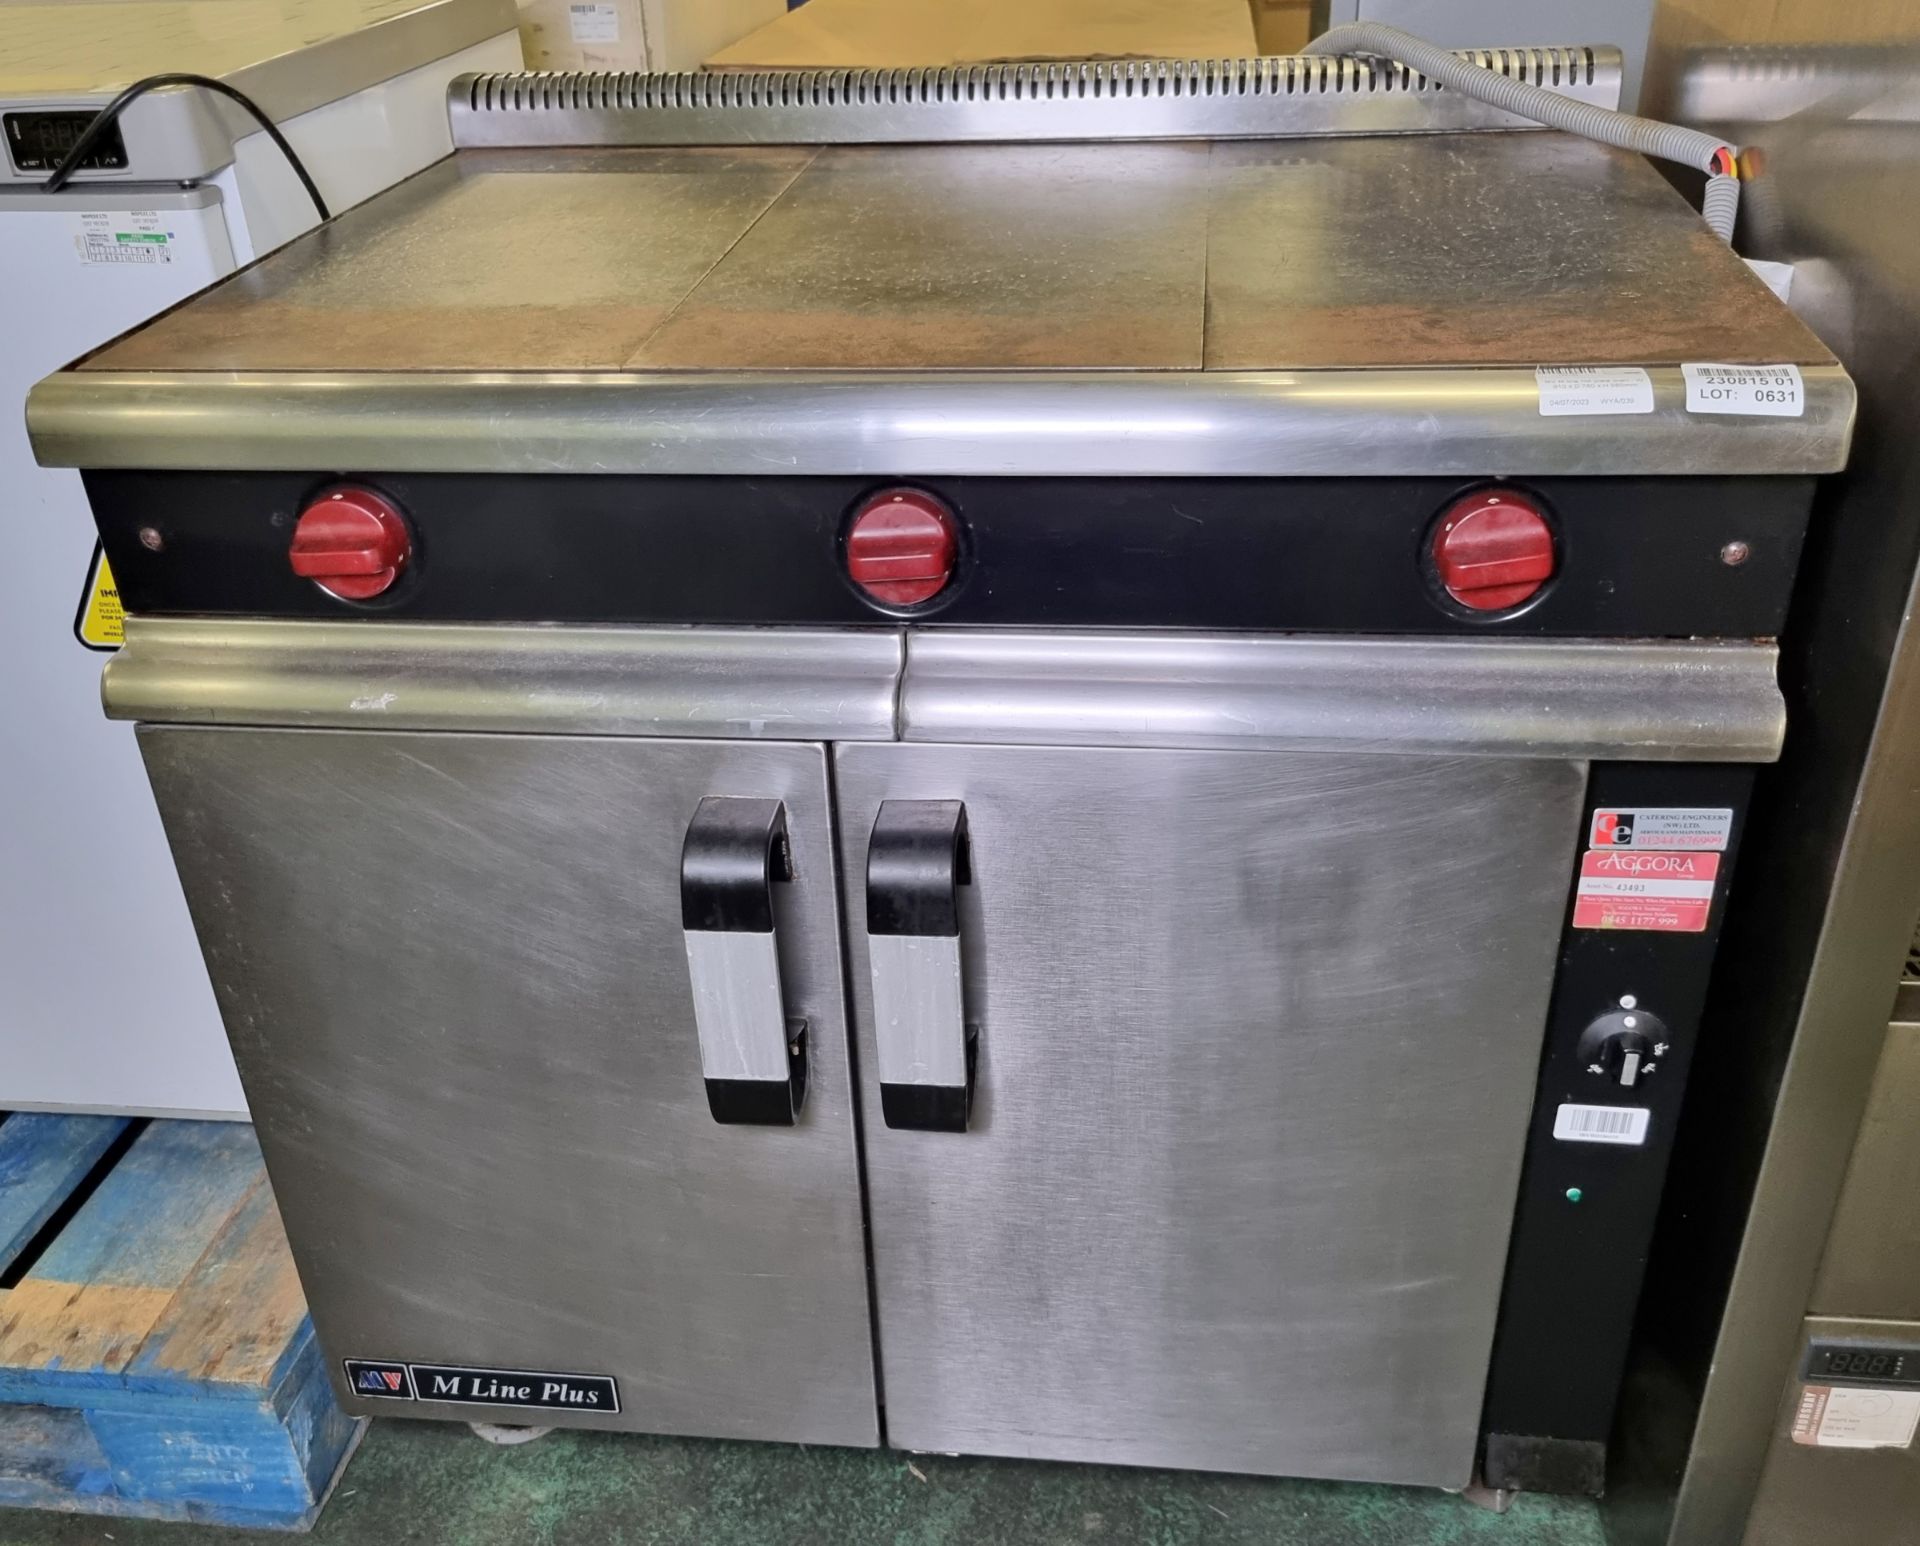 MV M line hot plate oven - W 910 x D 760 x H 980mm